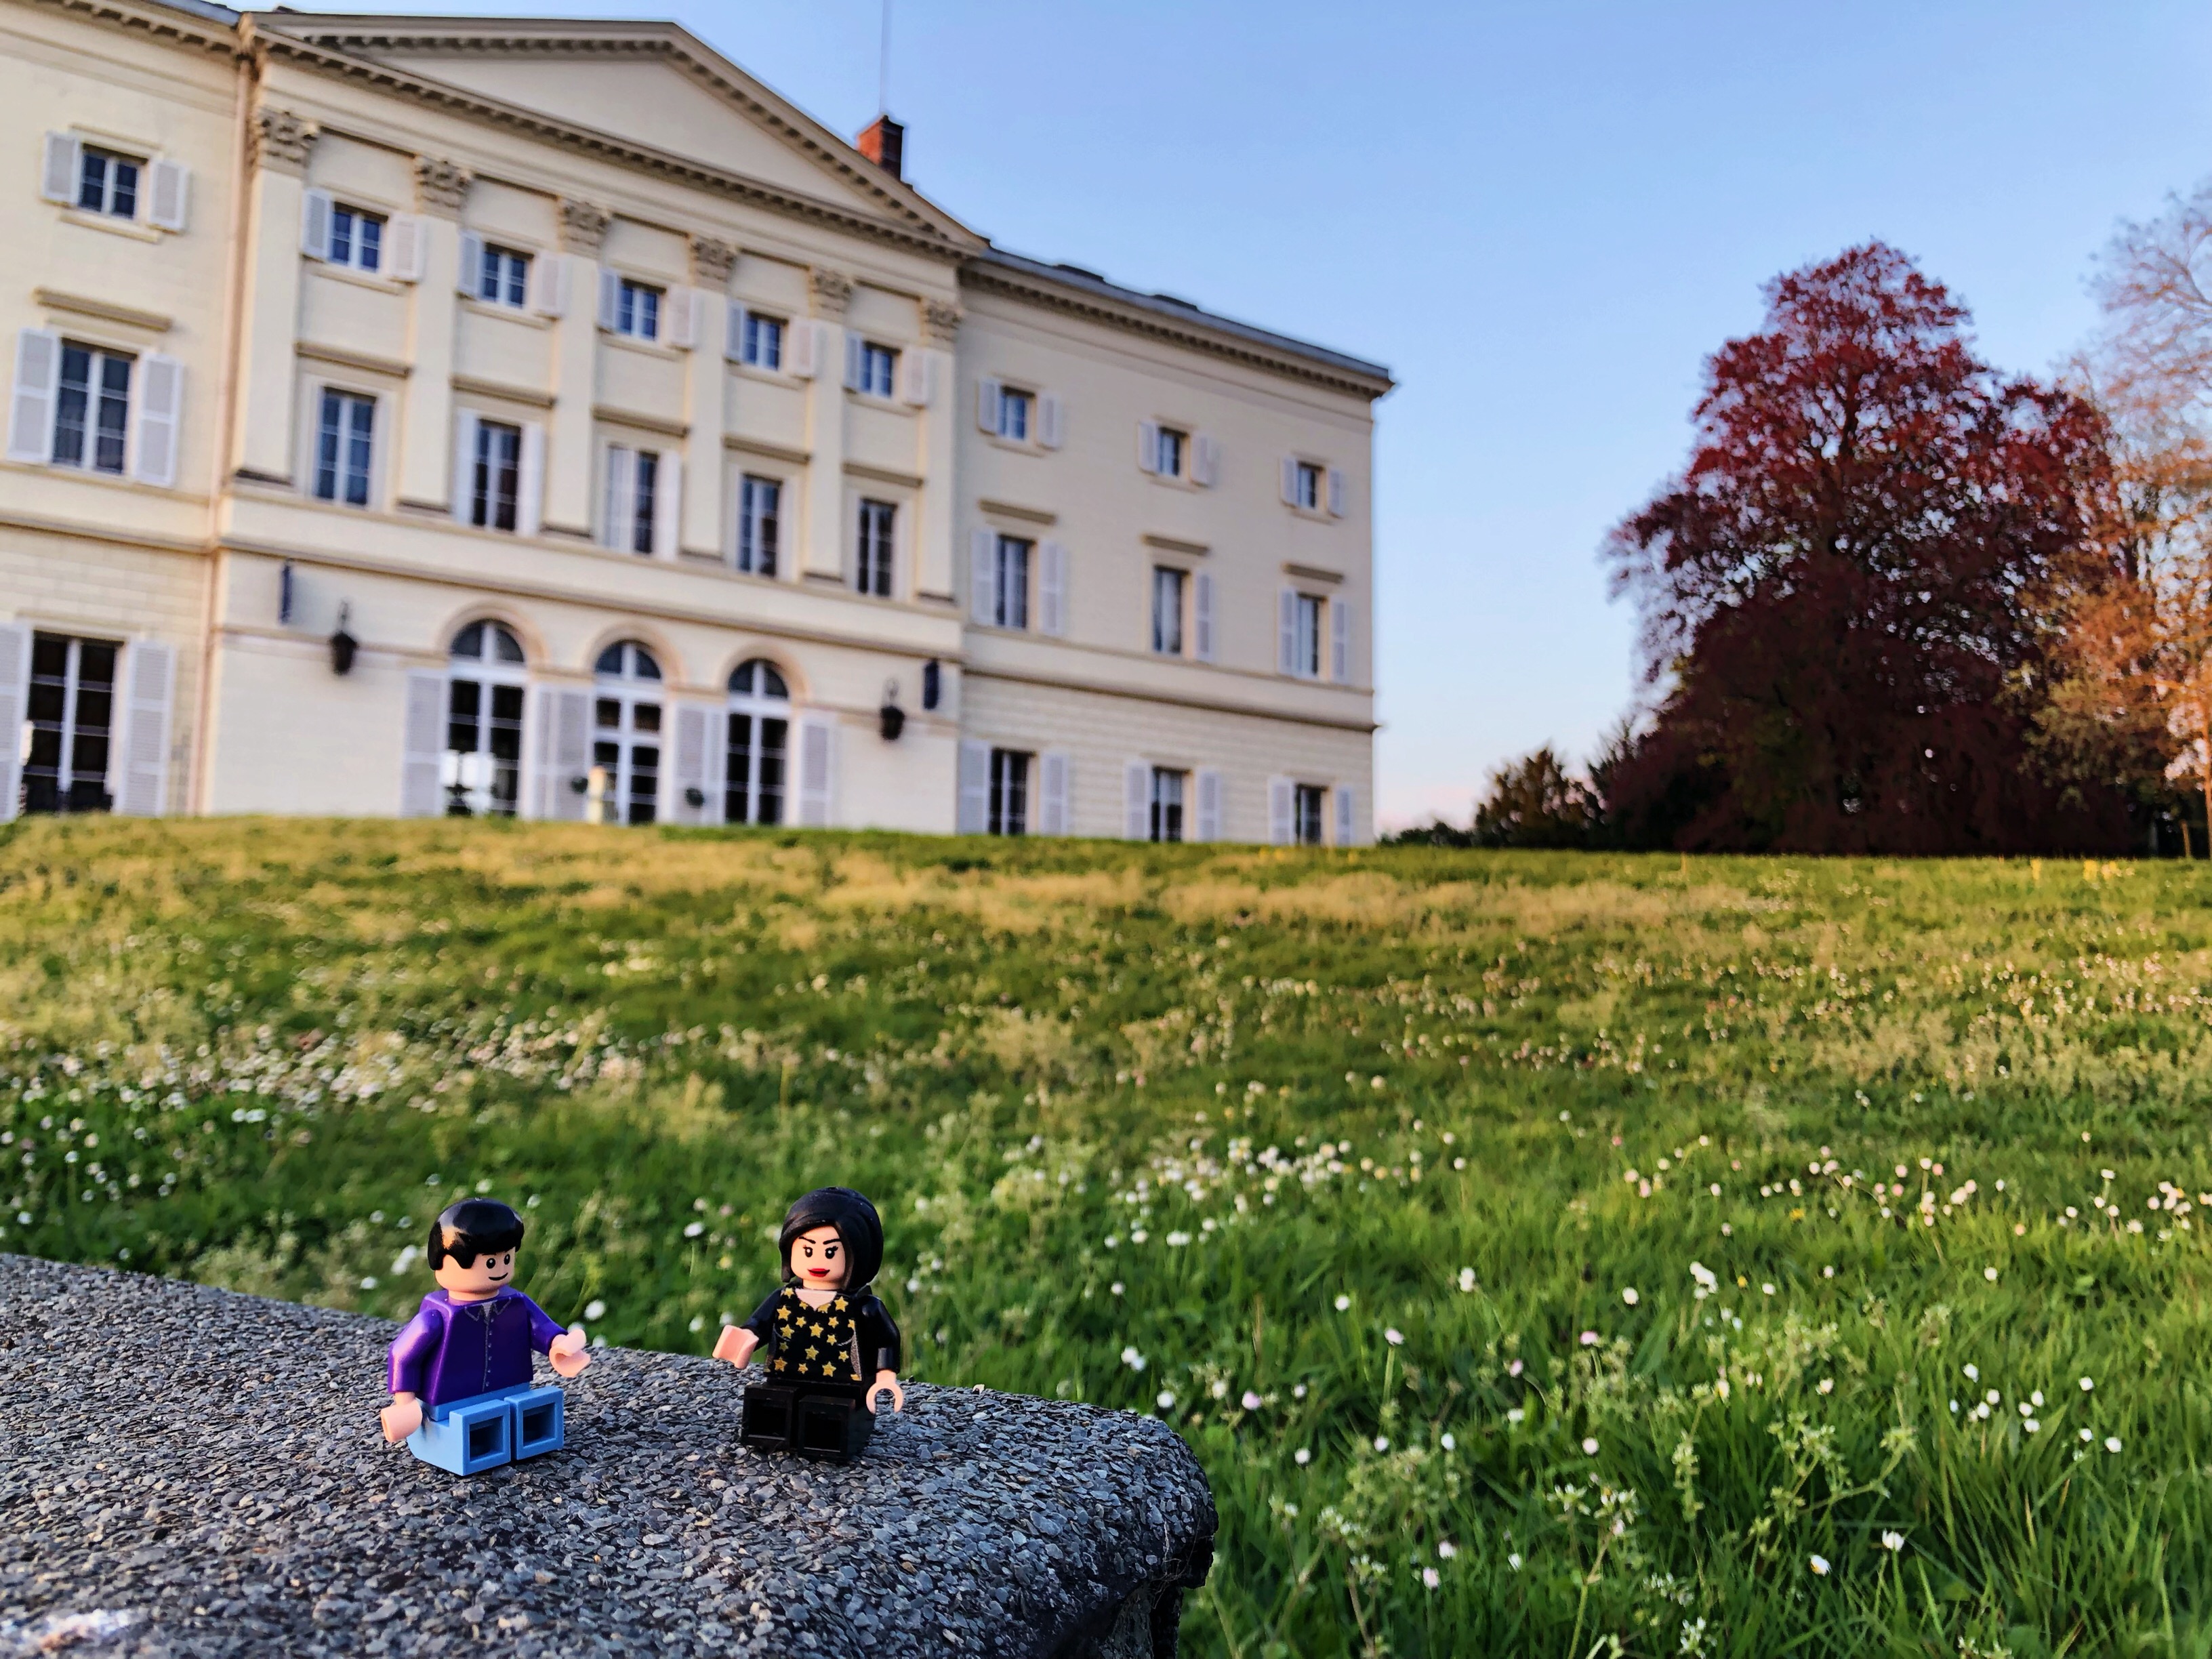 A lego man and woman sat together on stone in the grass in front of the HEC Chateau, which features in the background along trees of varying colours